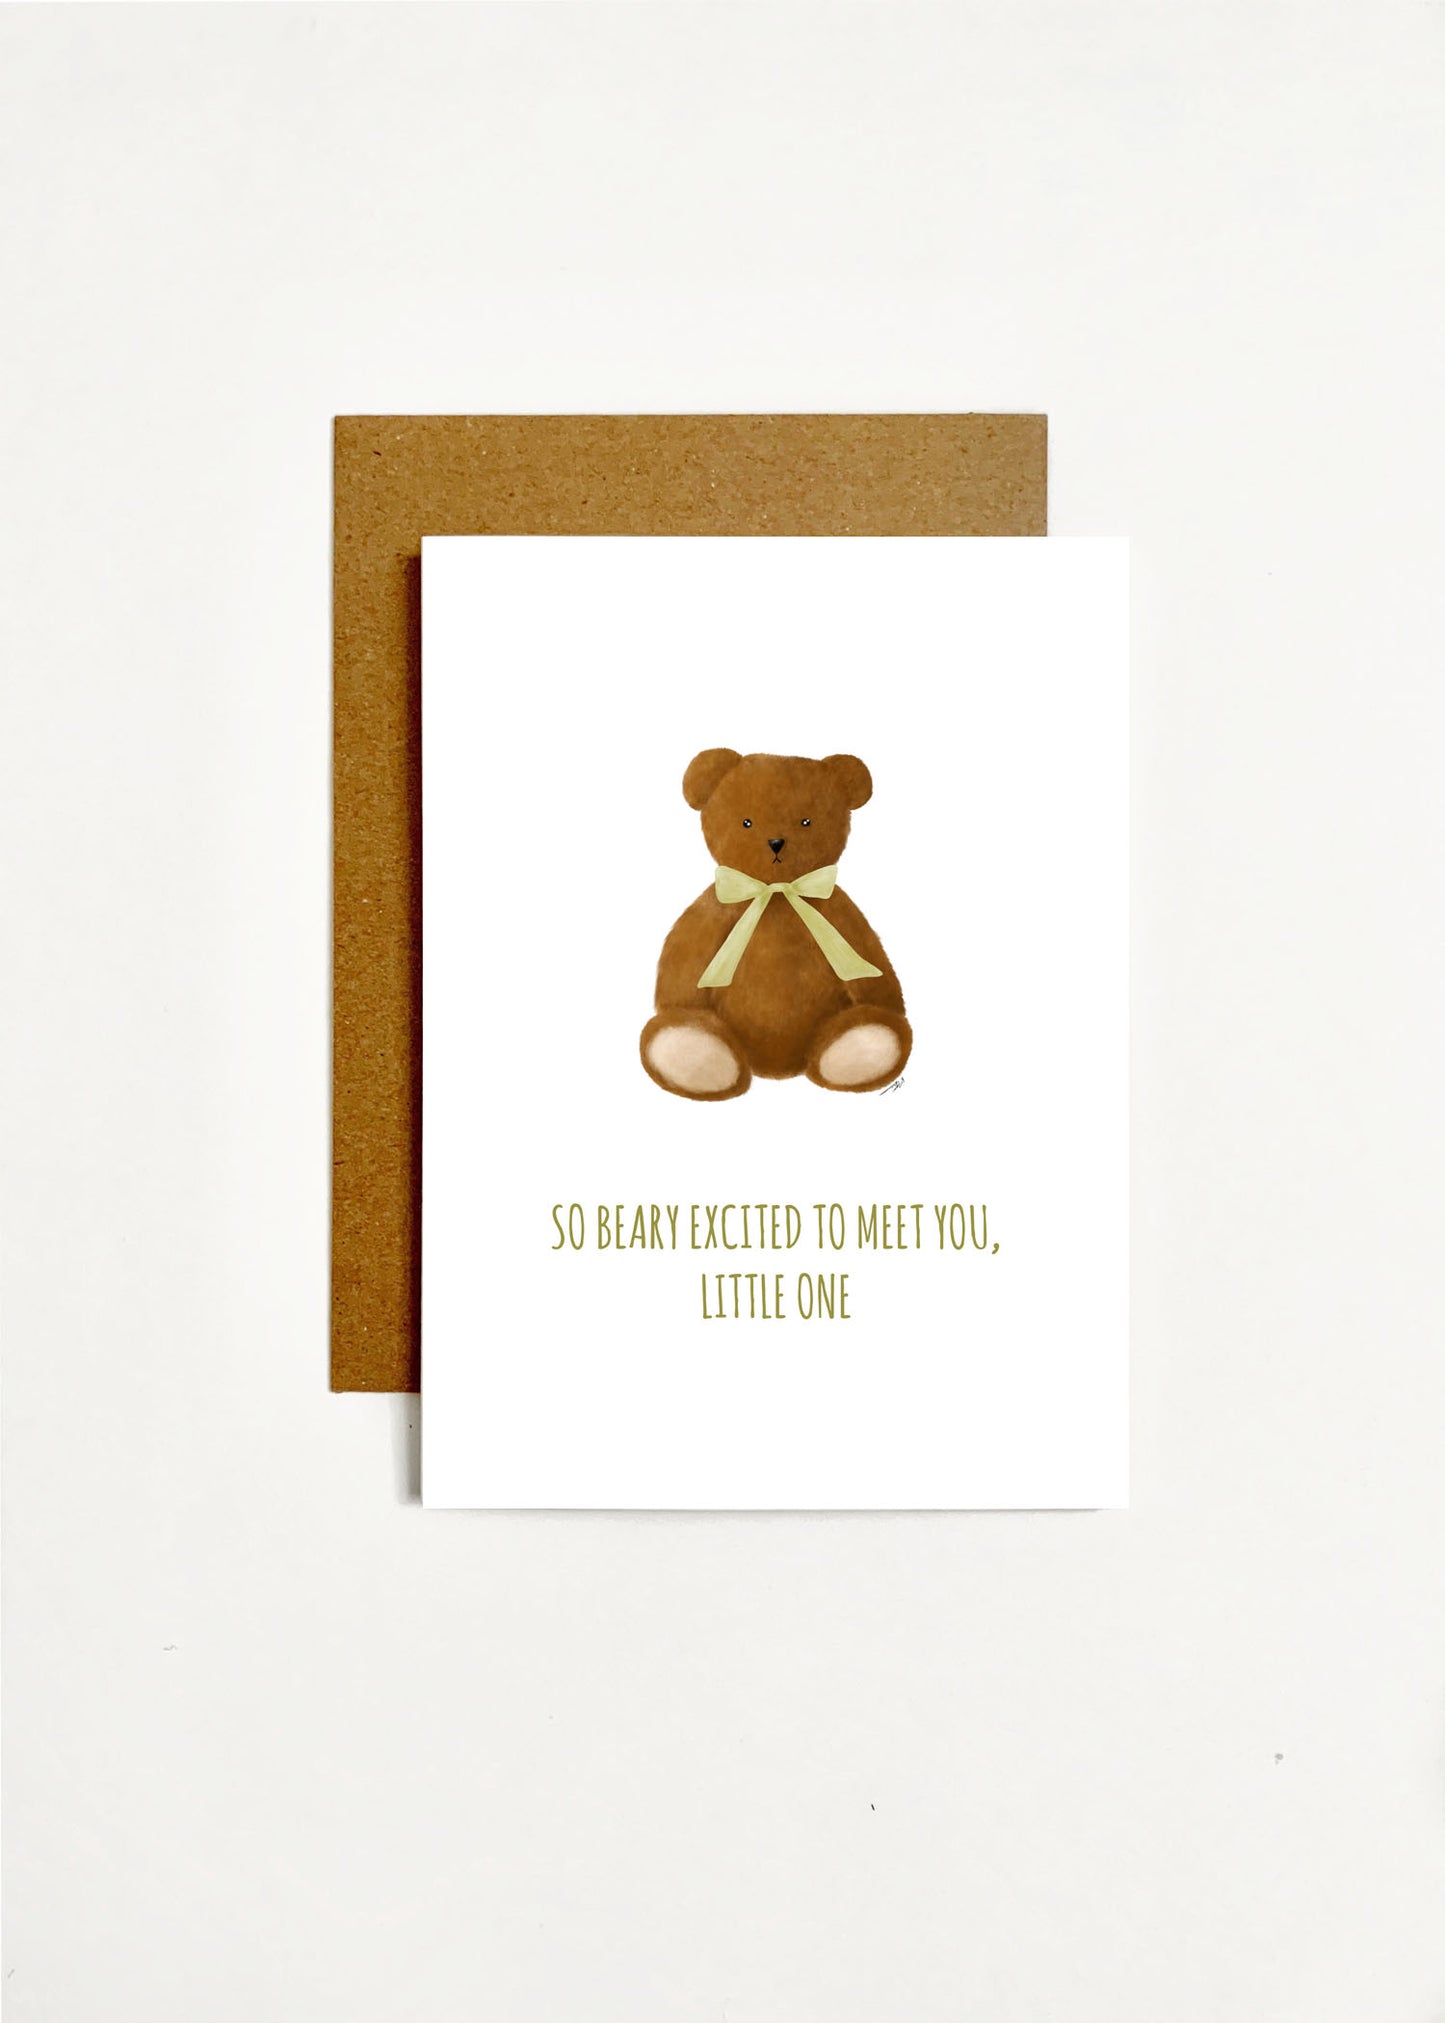 So Beary Excited To Meet You, Little One - Green Ribbon